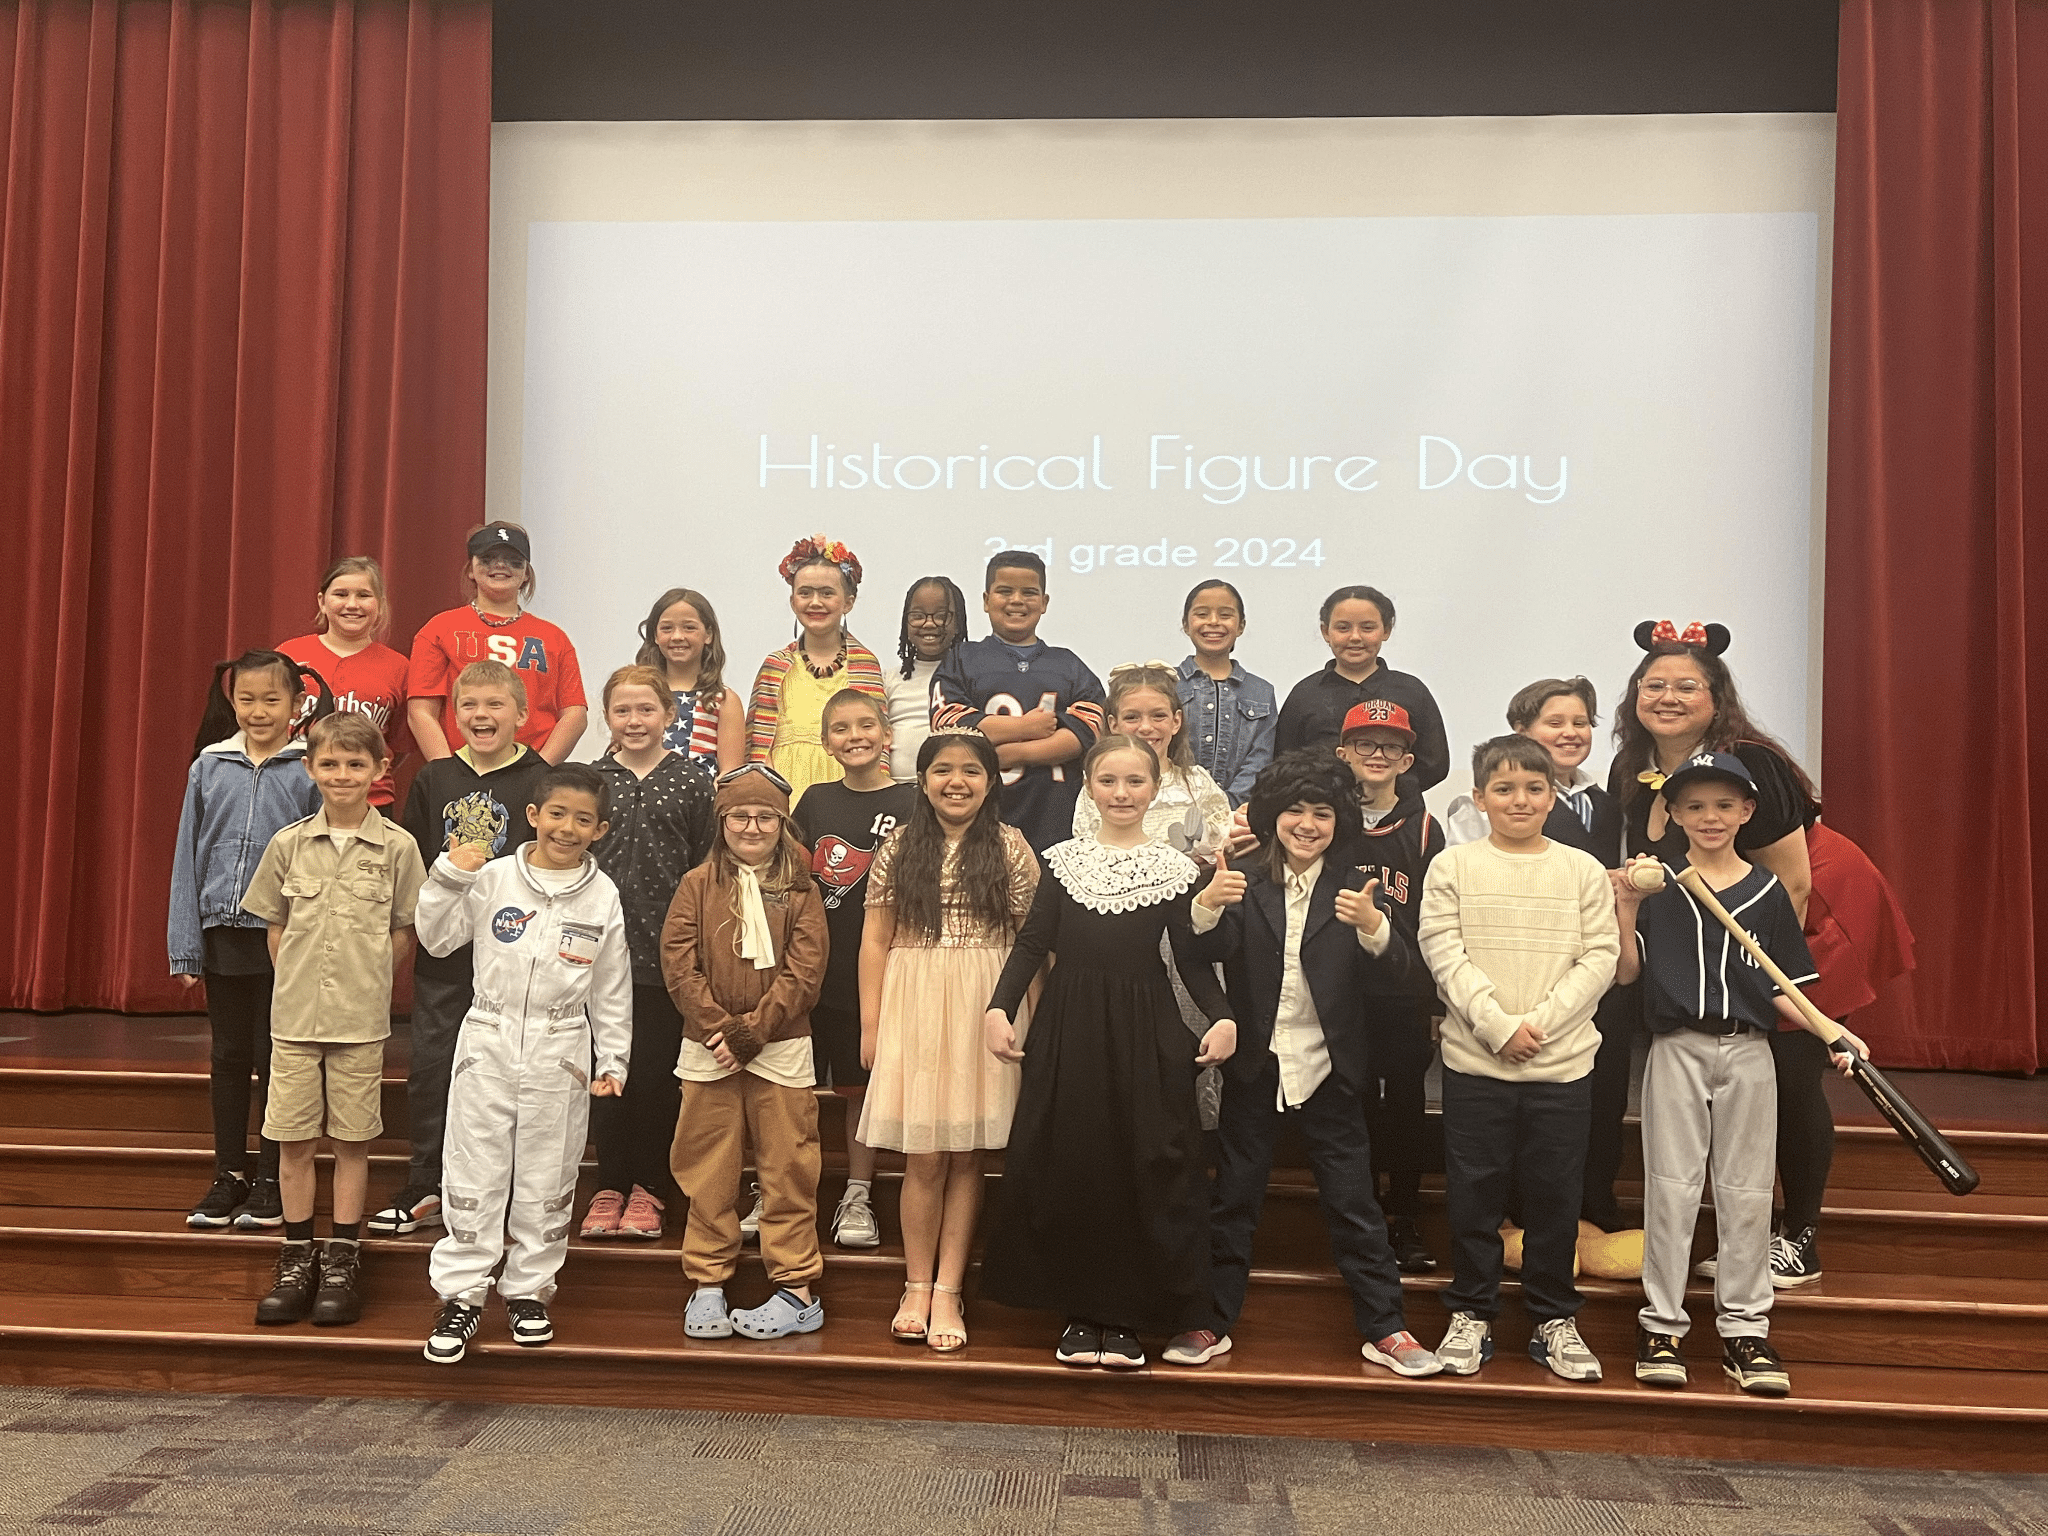 Mrs. Walters’ class did an amazing job with their historical figure presentations. The picture shows the students dressed in character for their presentations.